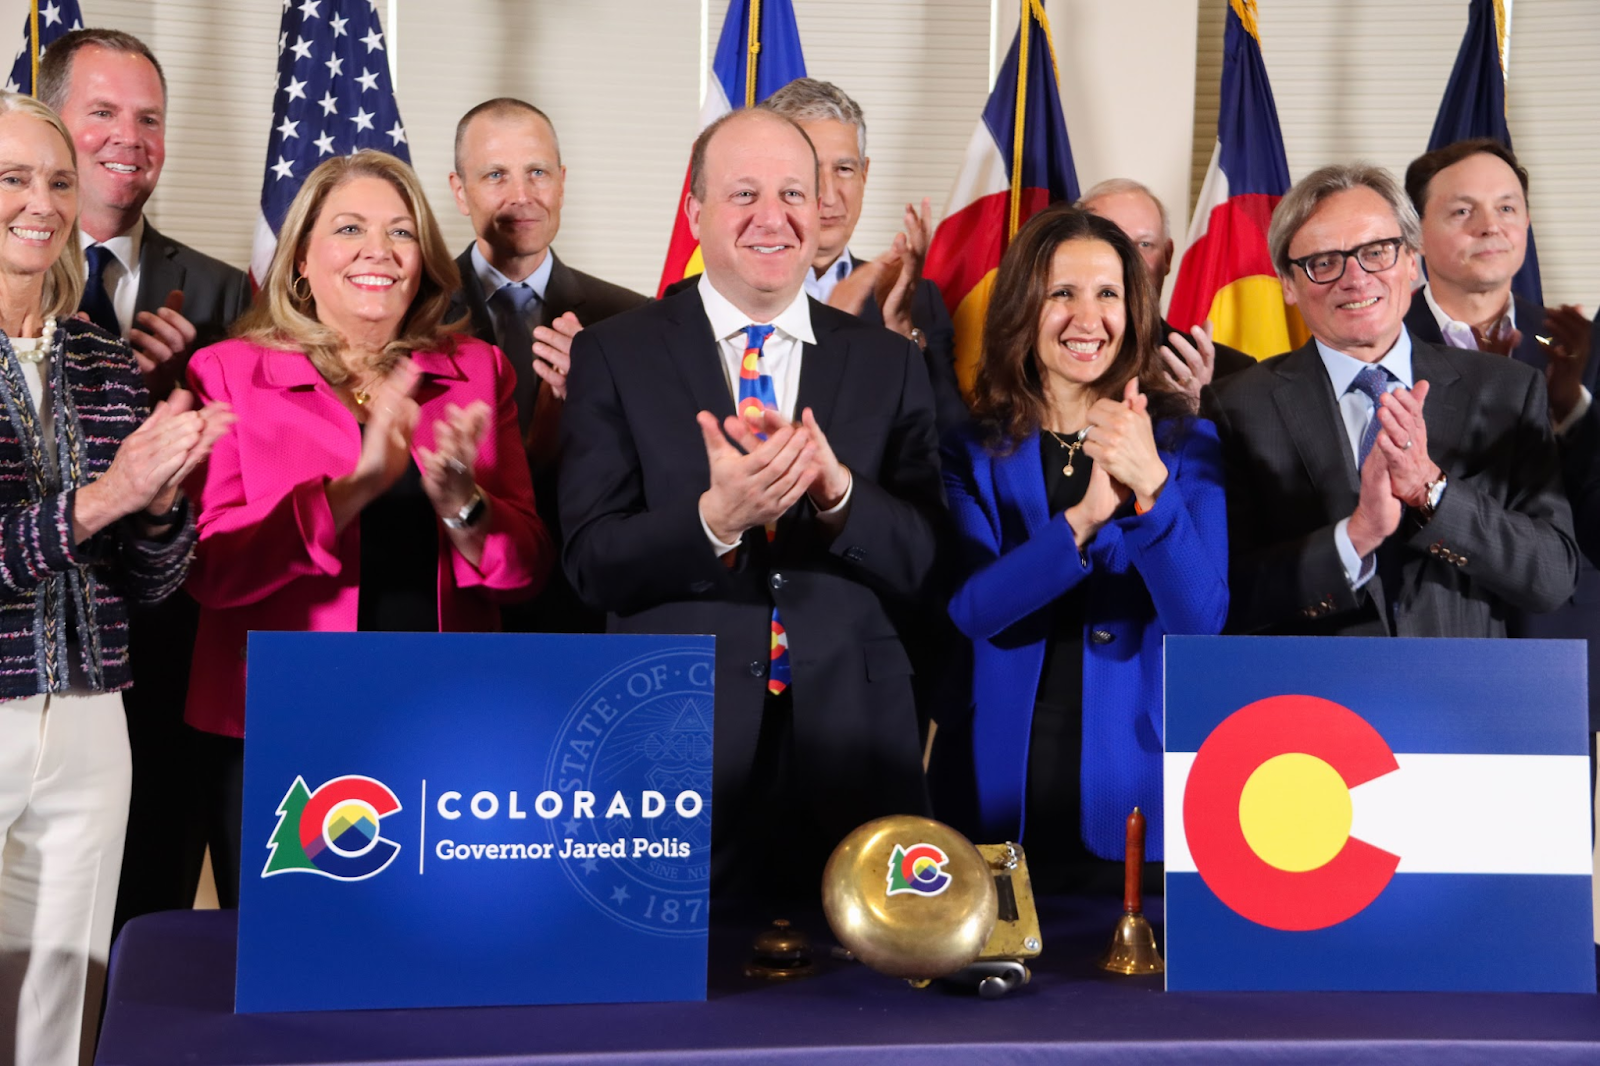 Governor Polis claps alongside New York Stock Exchange President and Colorado business leaders.